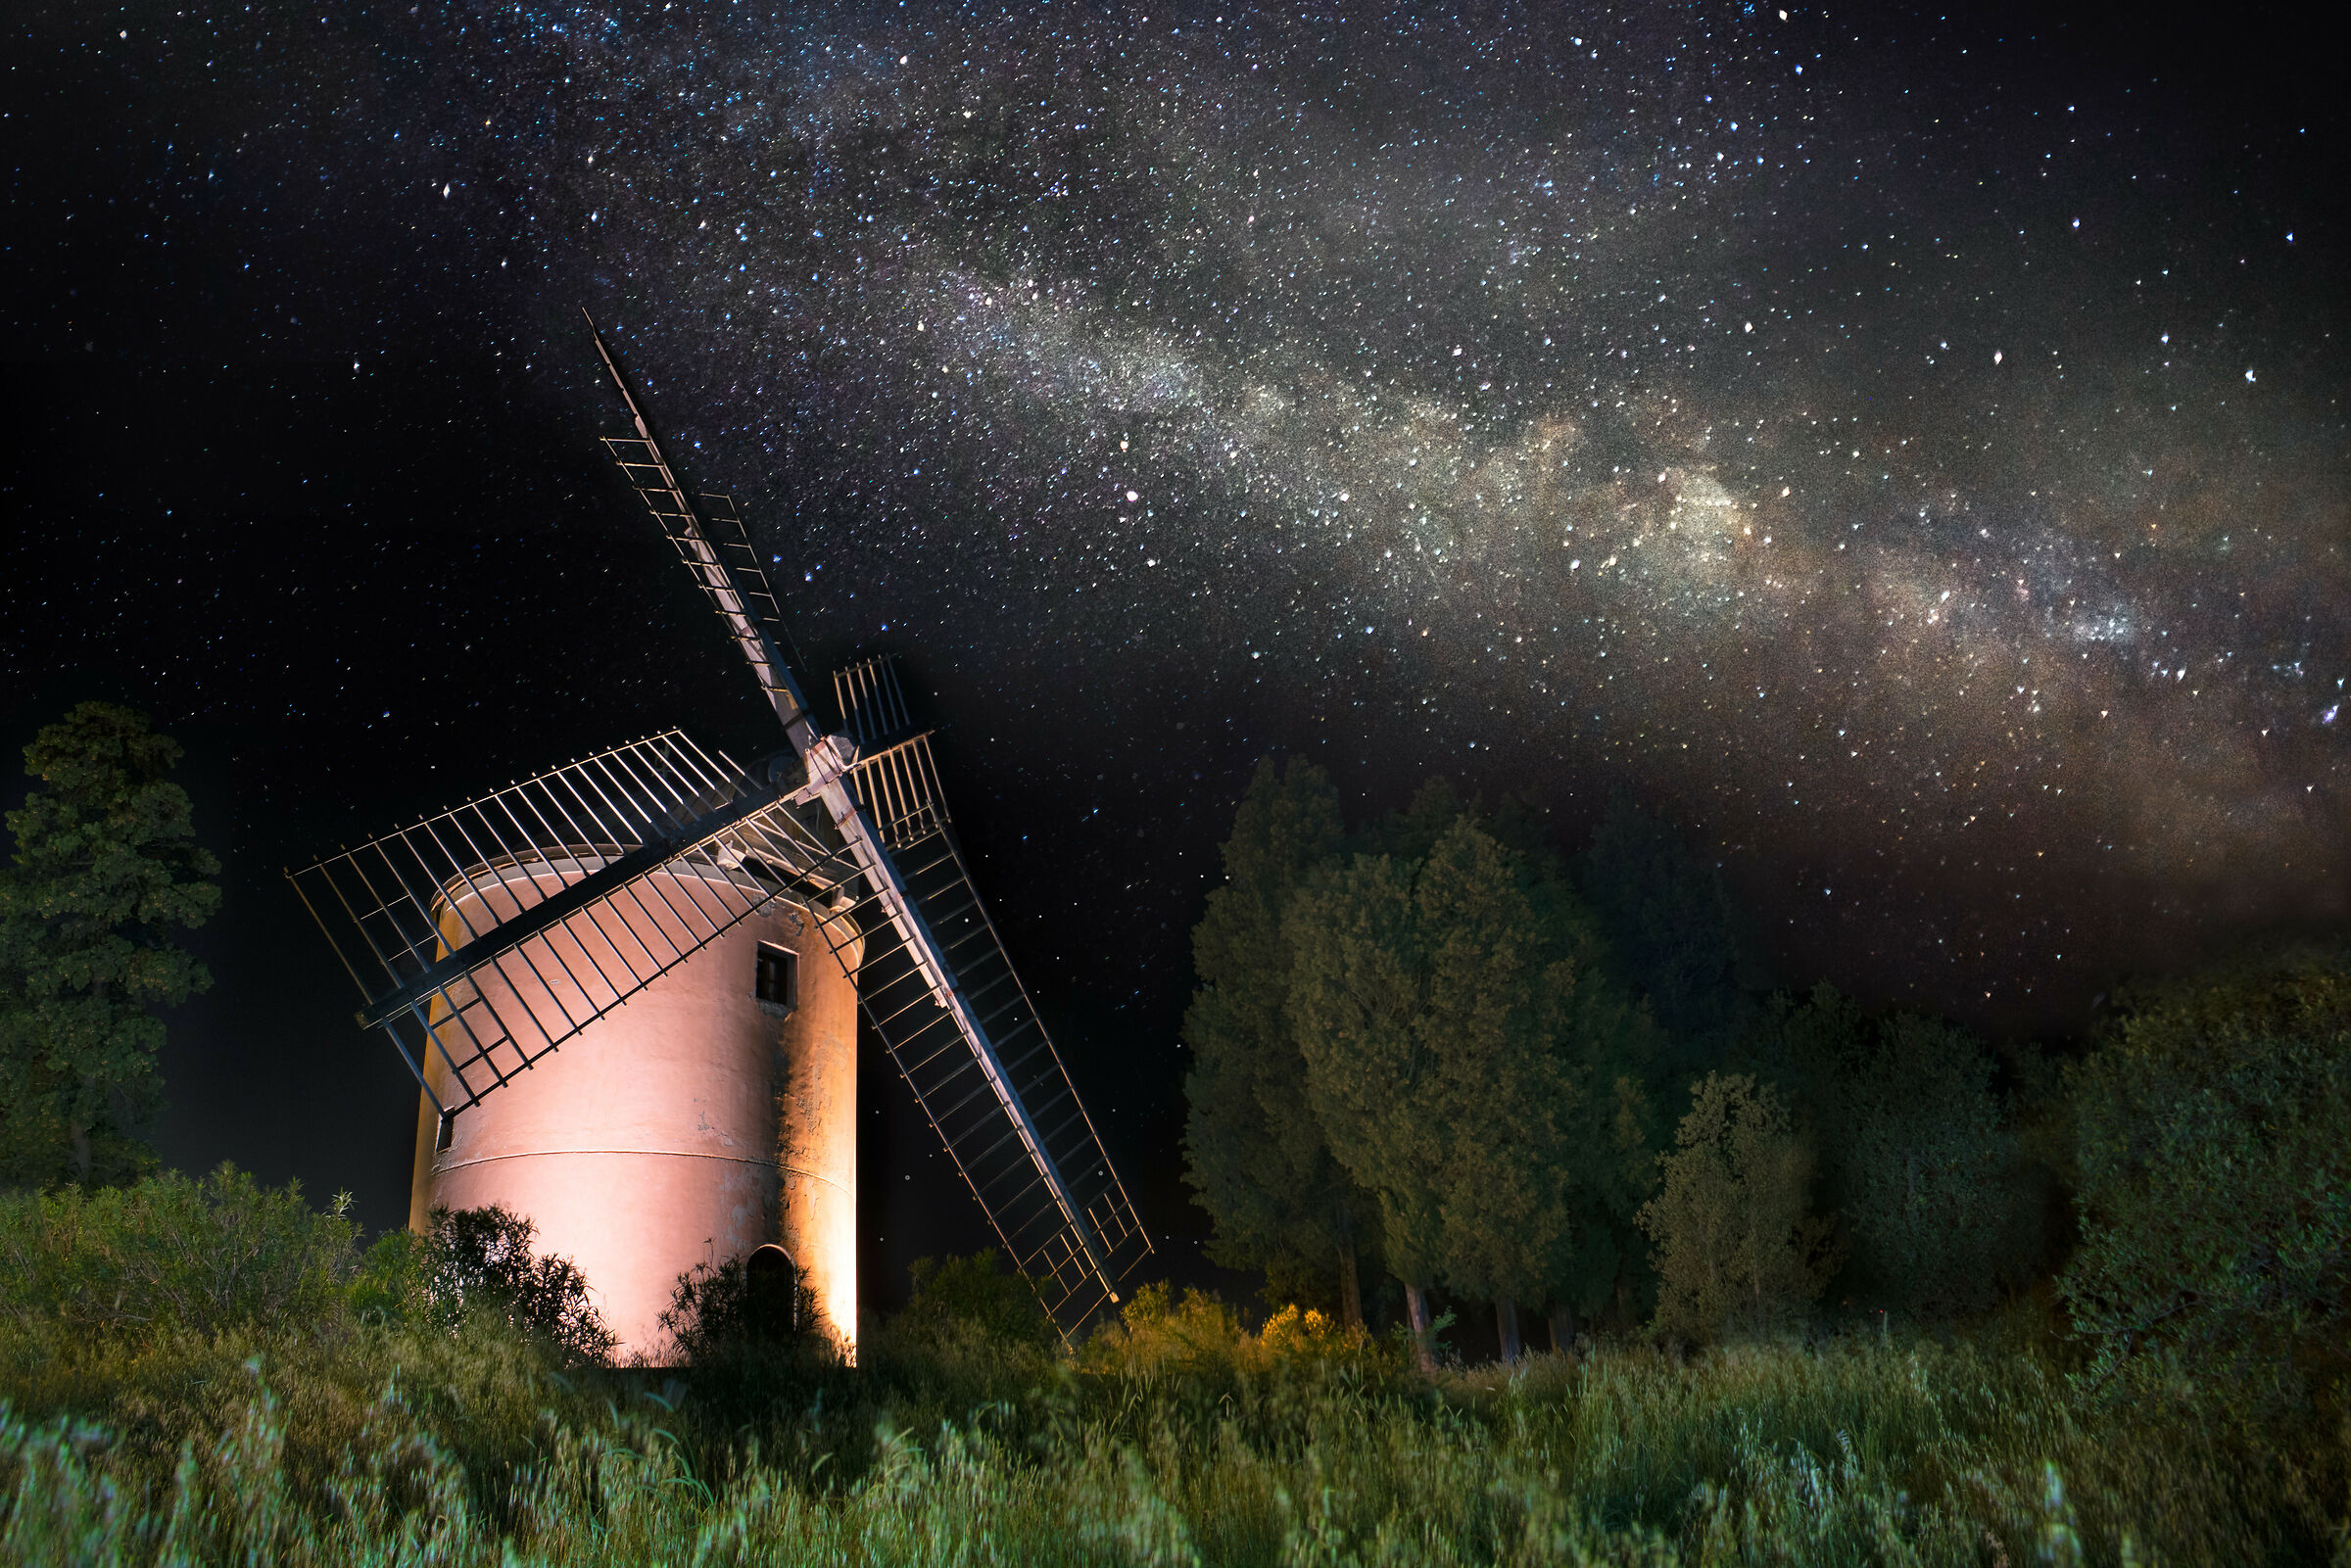 ... the mill and the Milky Way 2...